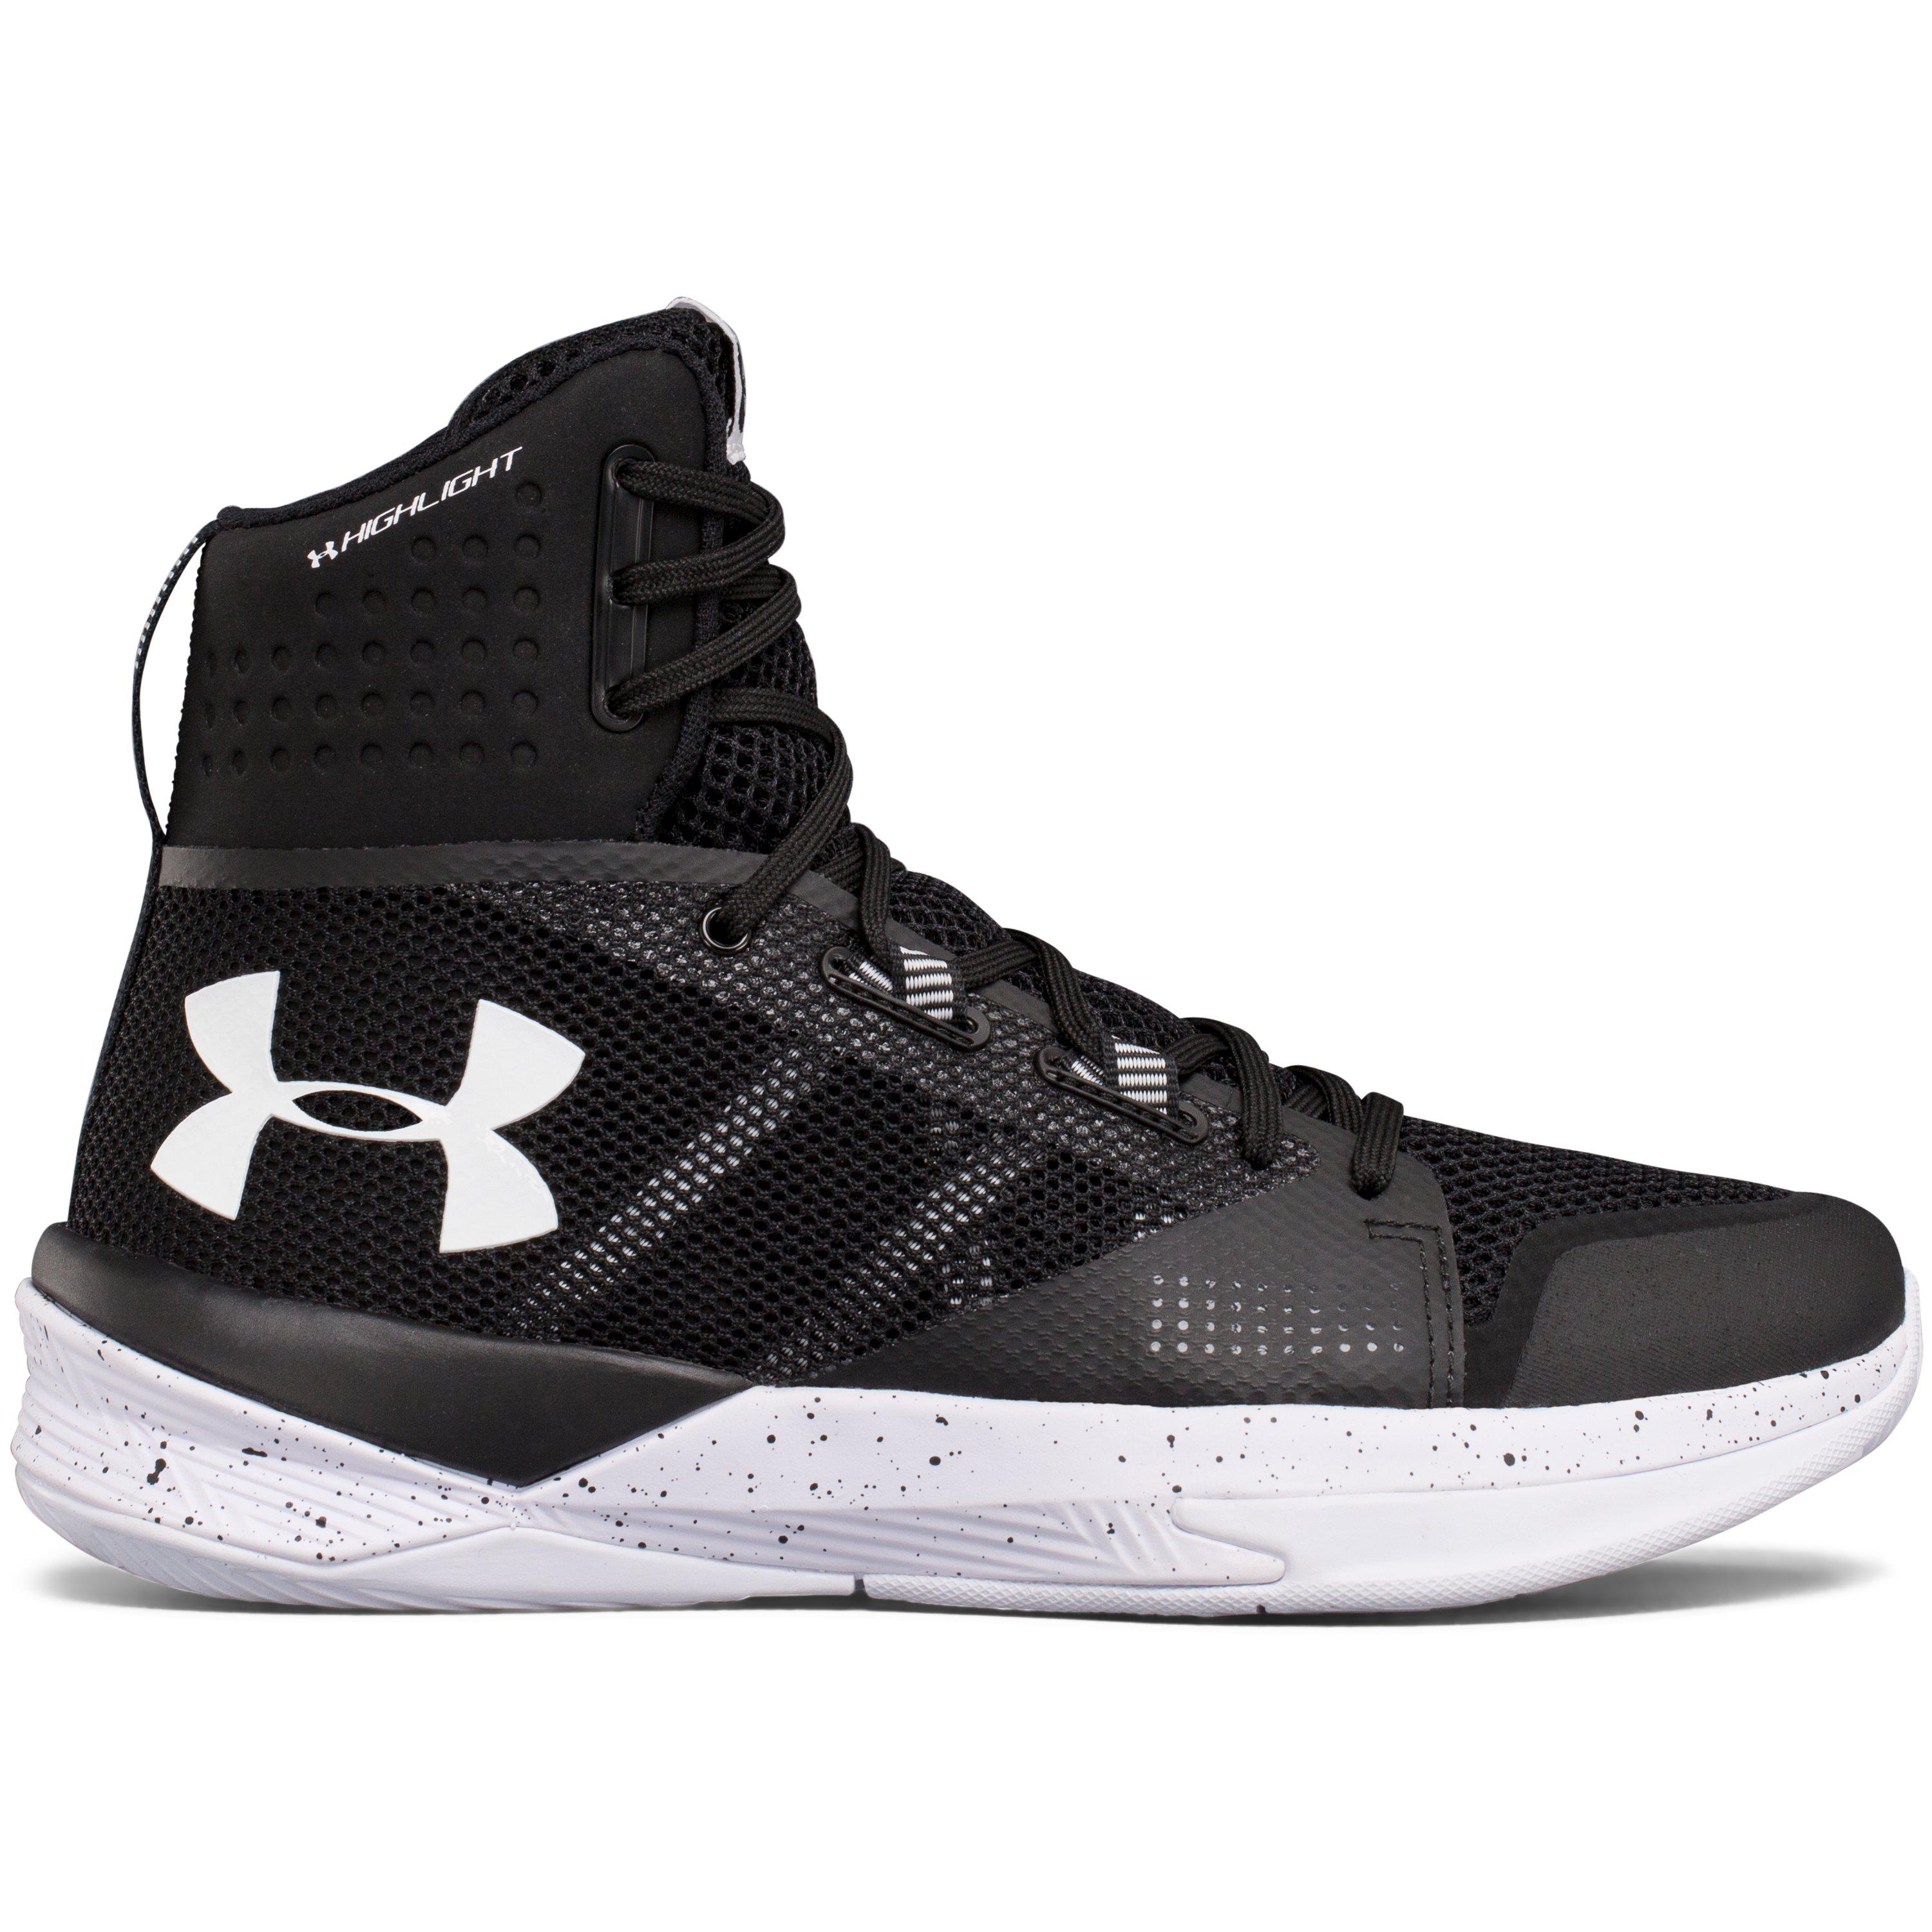 Under Armour Women's Highlight Ace Volleyball Shoe